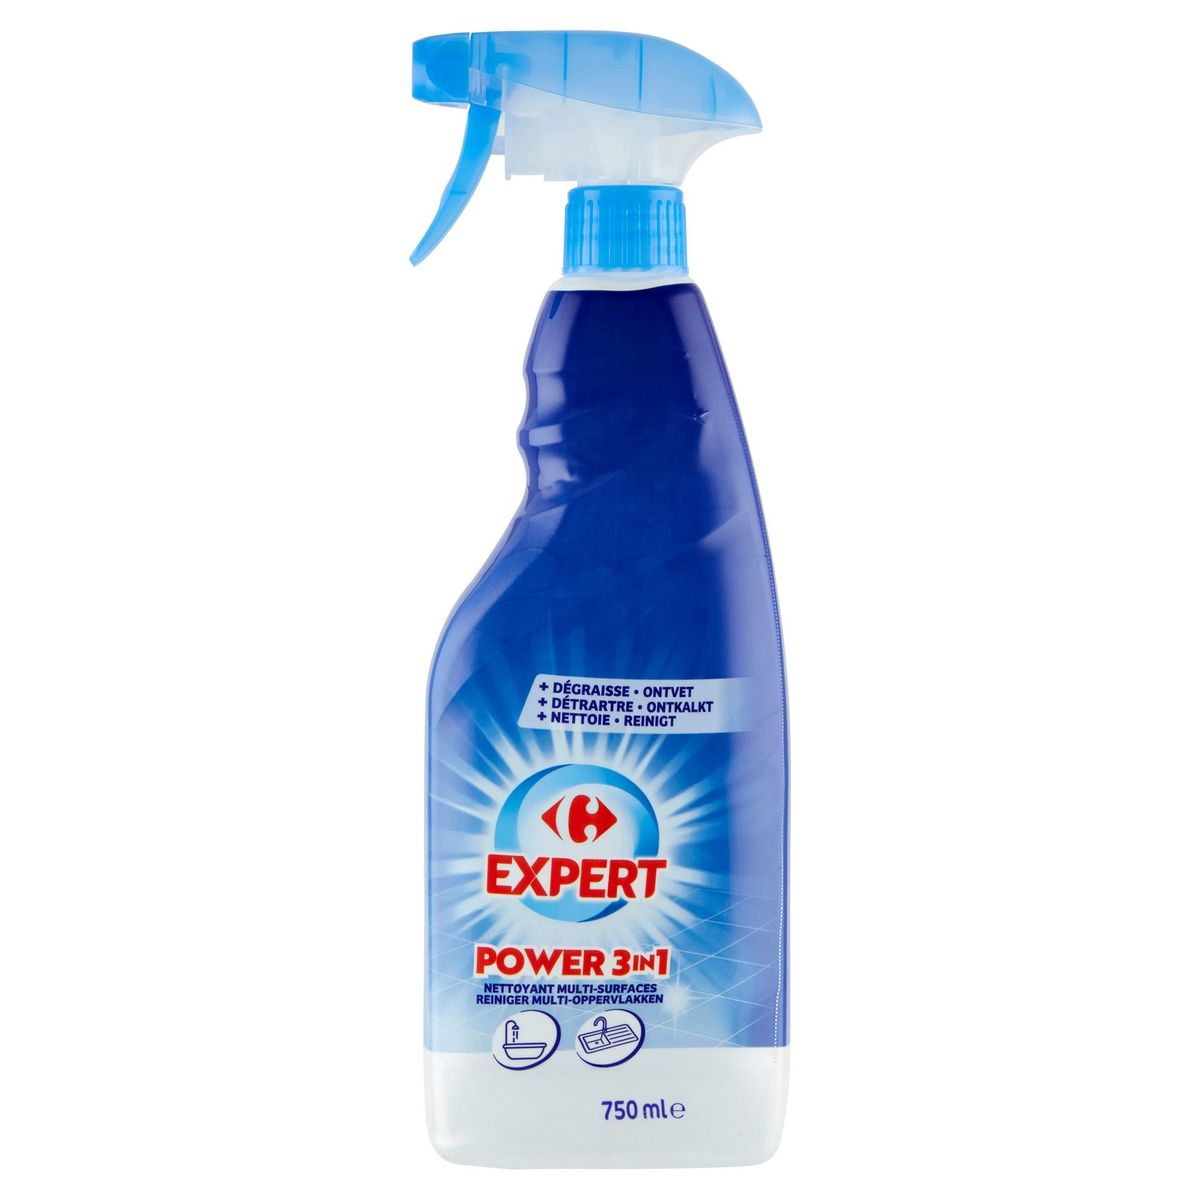 Carrefour Expert Power 3in1 Nettoyant Multi-Surfaces 750 ml